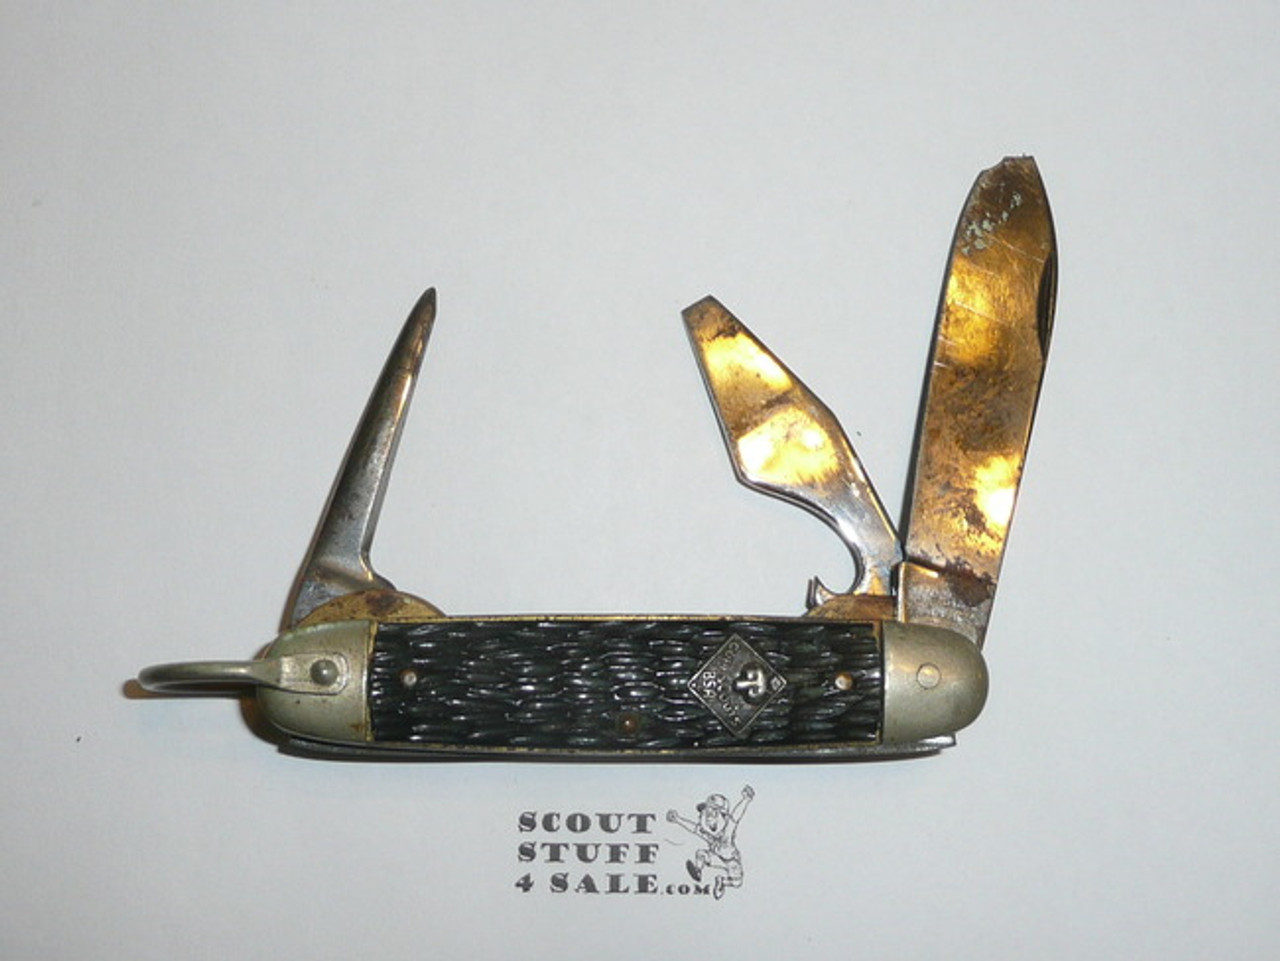 Cub Scout Knife, Imperial, Used, Logo Still Visible on Main Blade, Main Blade Damaged